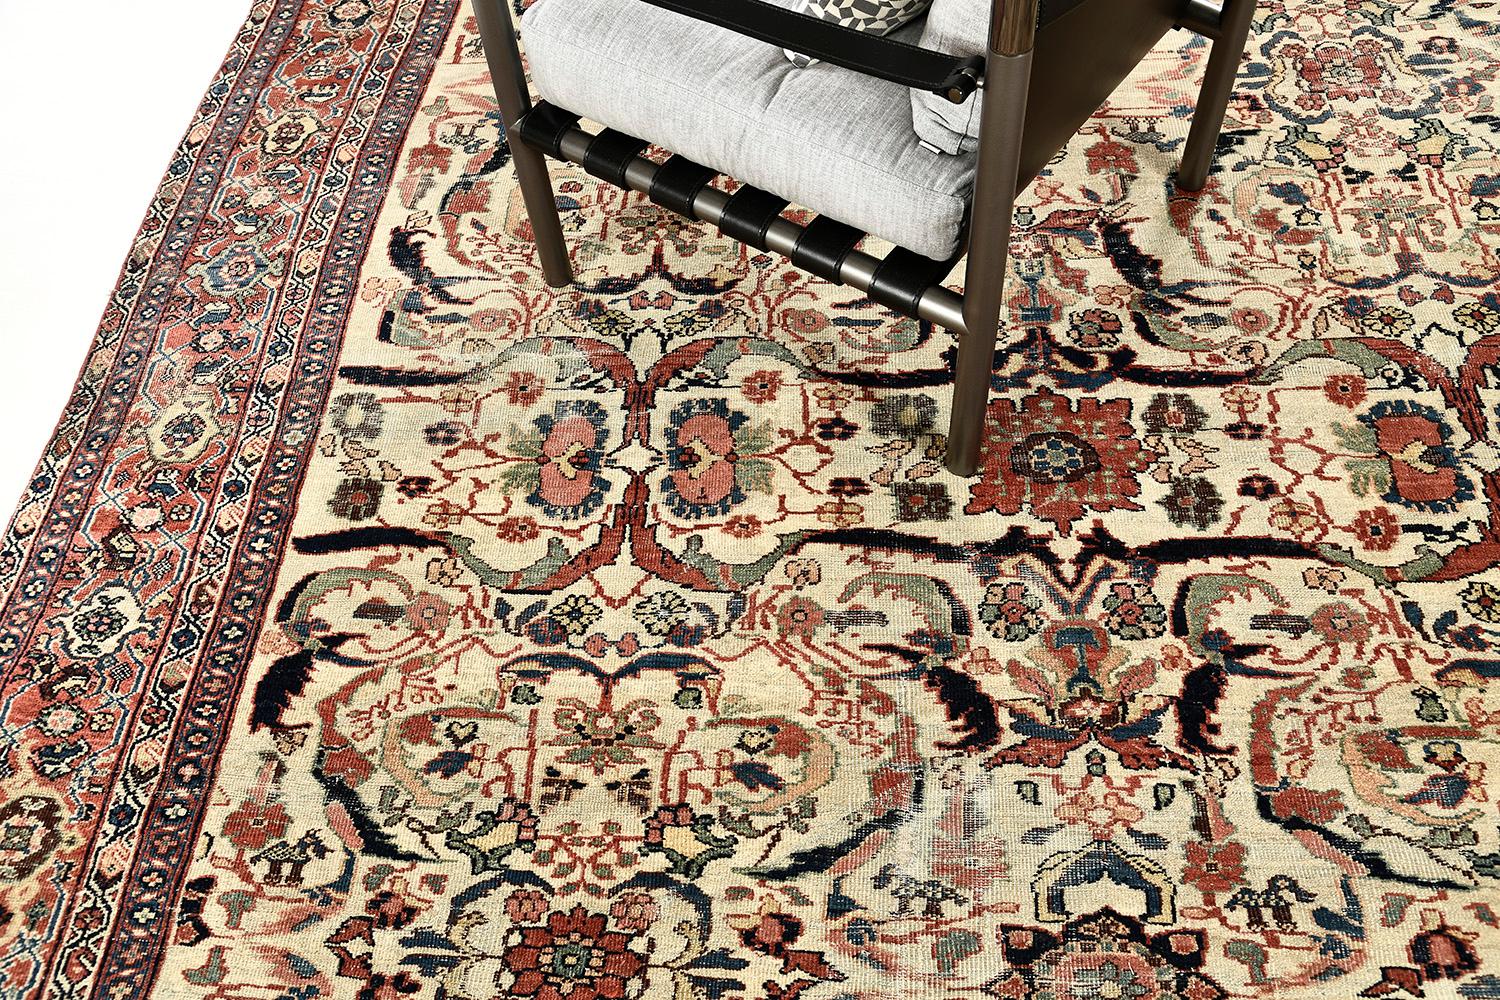 This majestic Mahal rug has created an impressive pattern. A well-coordinated earth-tone and terracotta accents play a big role in this palette. This elegant rug is composed of enchanting florid elements forming different grandiose medallions that